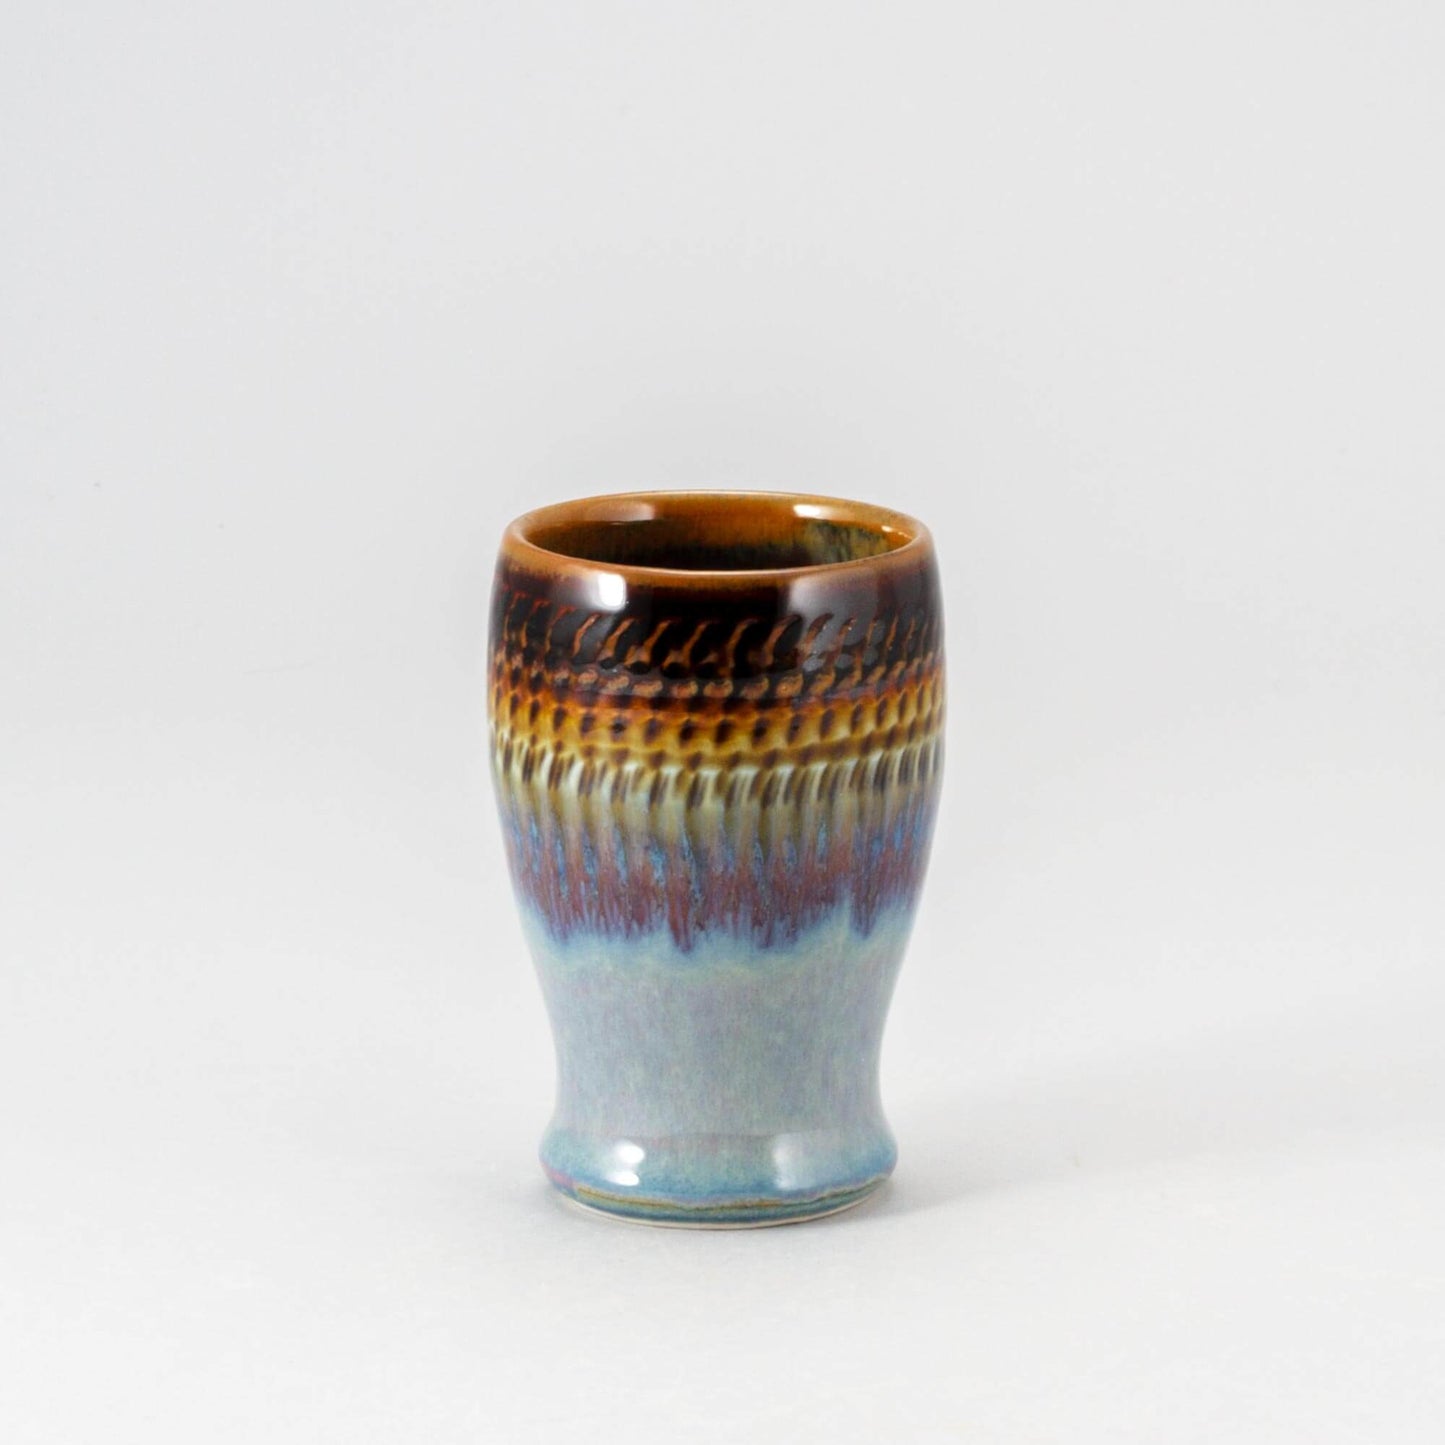 Handmade Pottery Curvy Tumbler in Purple Hamada pattern made by Georgetown Pottery in Maine